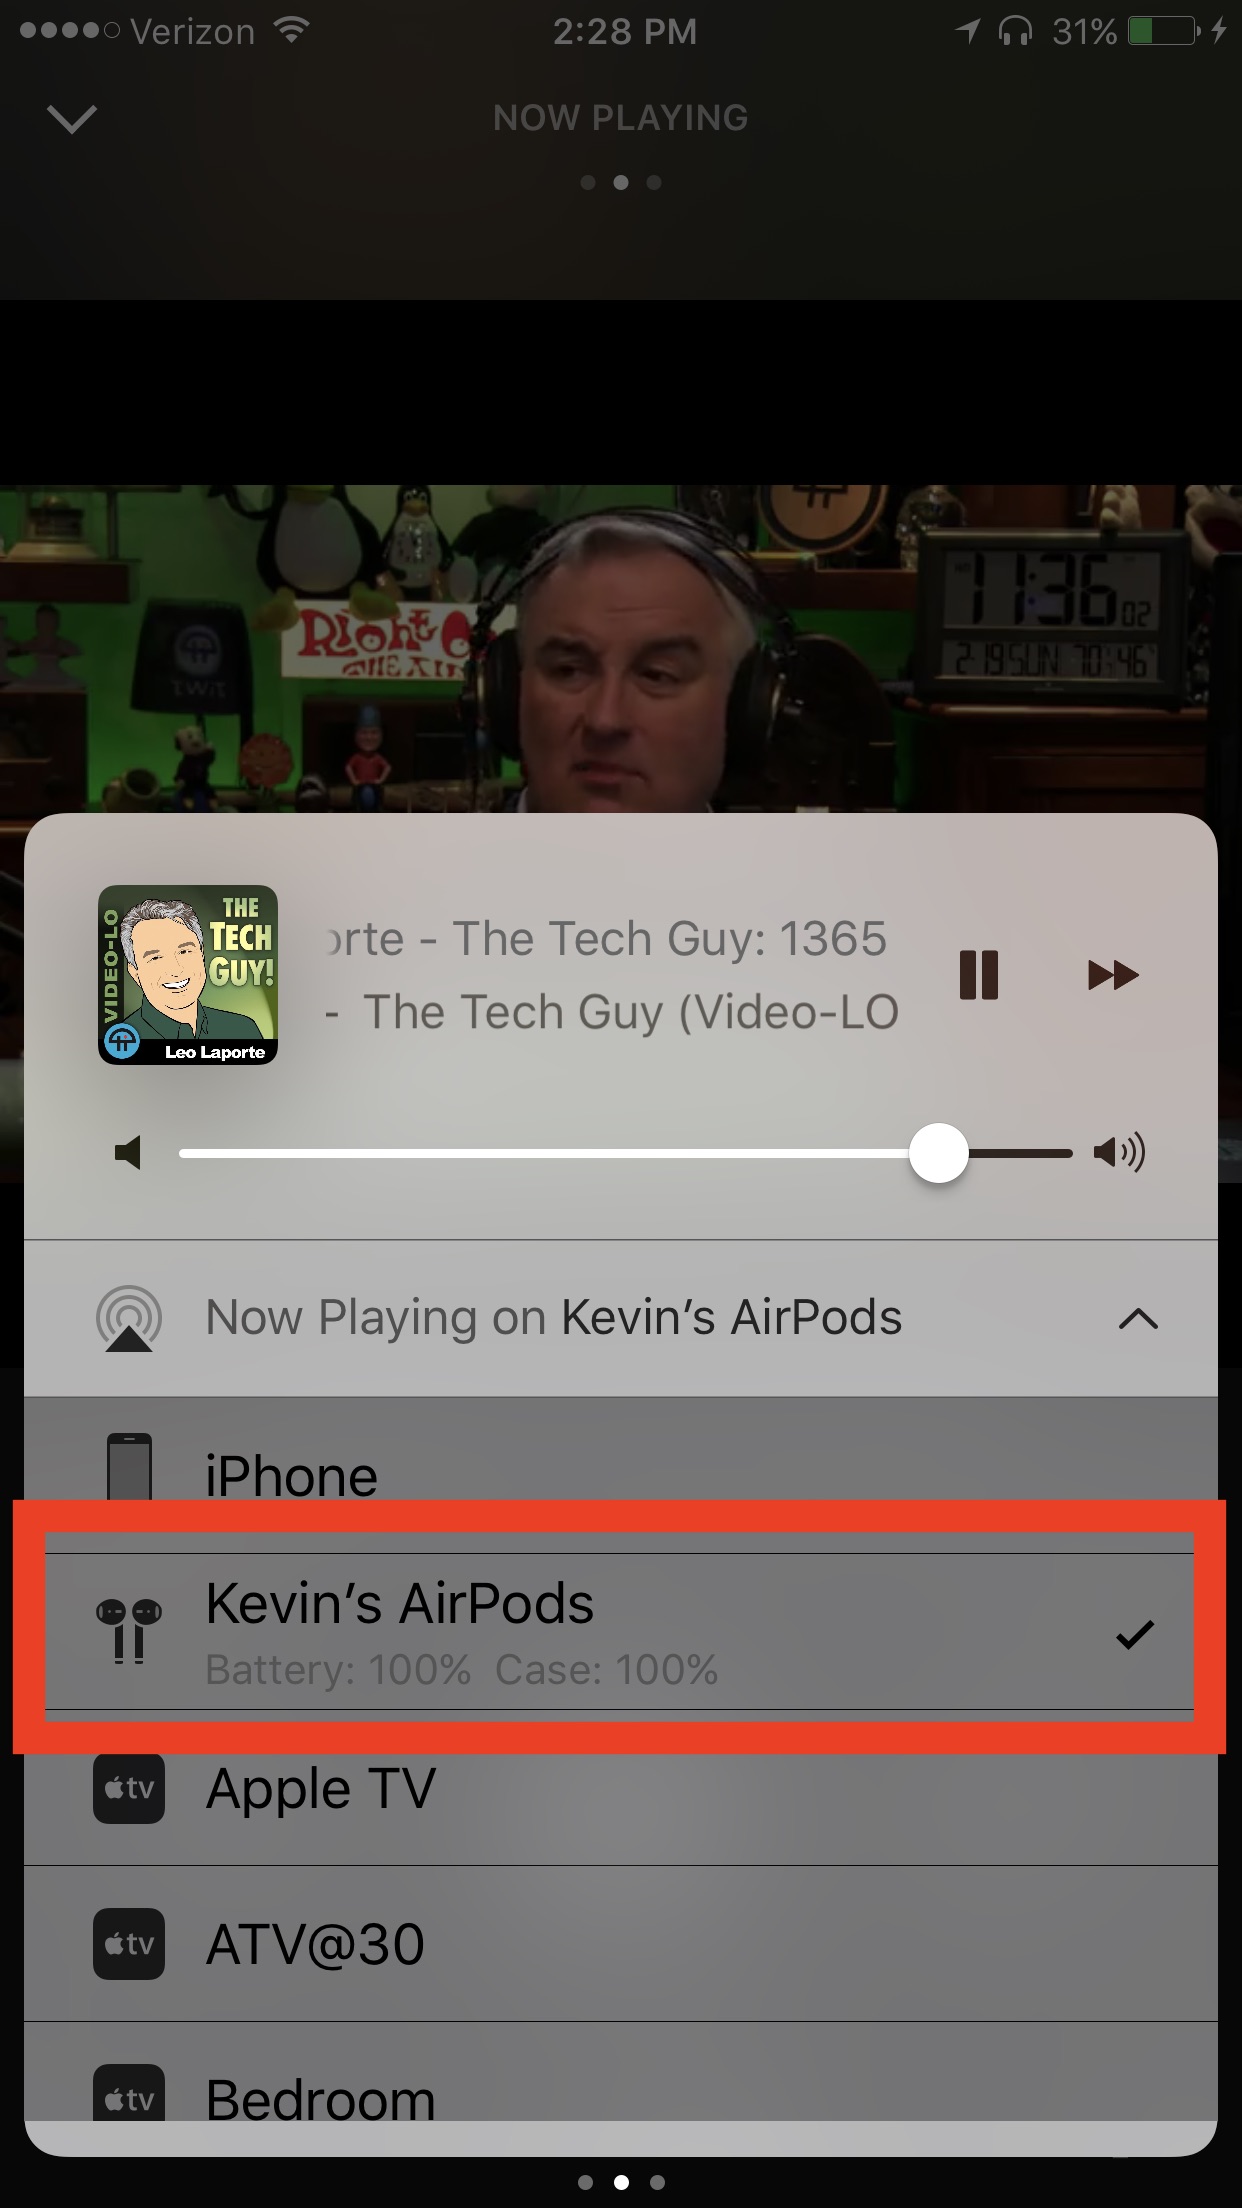 connect to airpods from control center